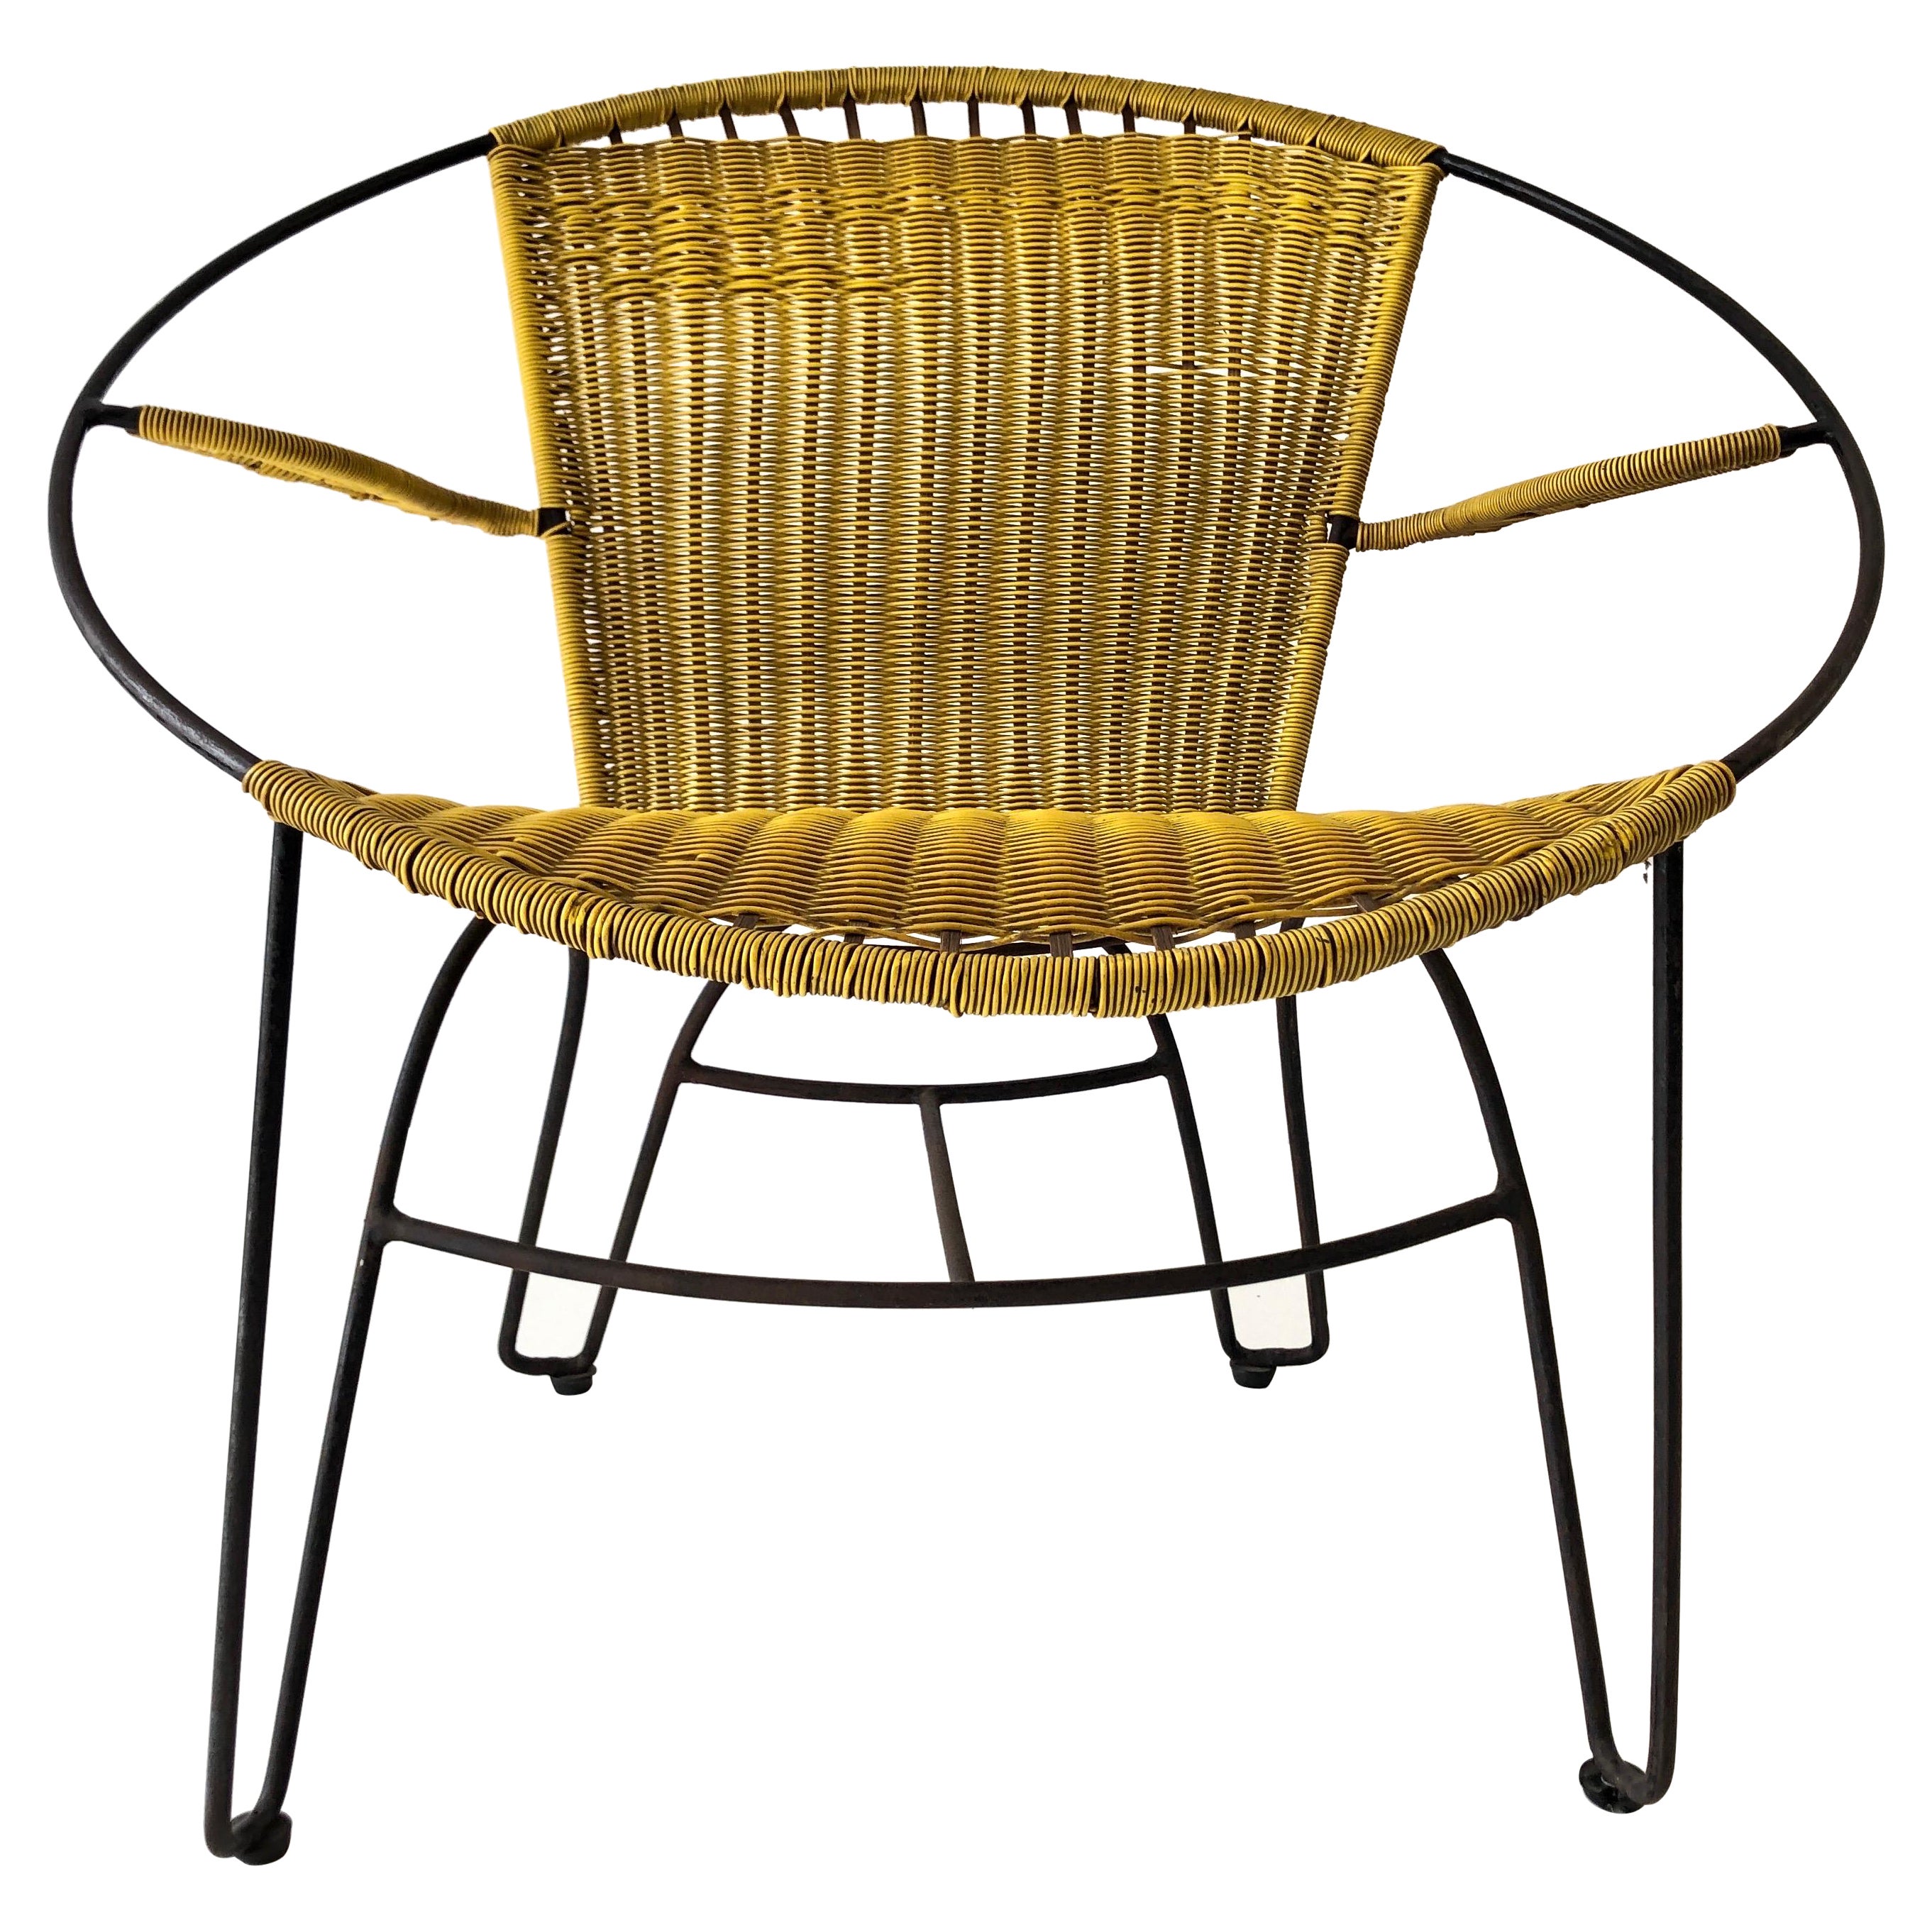 Iconic Italian Yellow Spaghetti Circle Design Relax Chair, 1970s, Italy For Sale